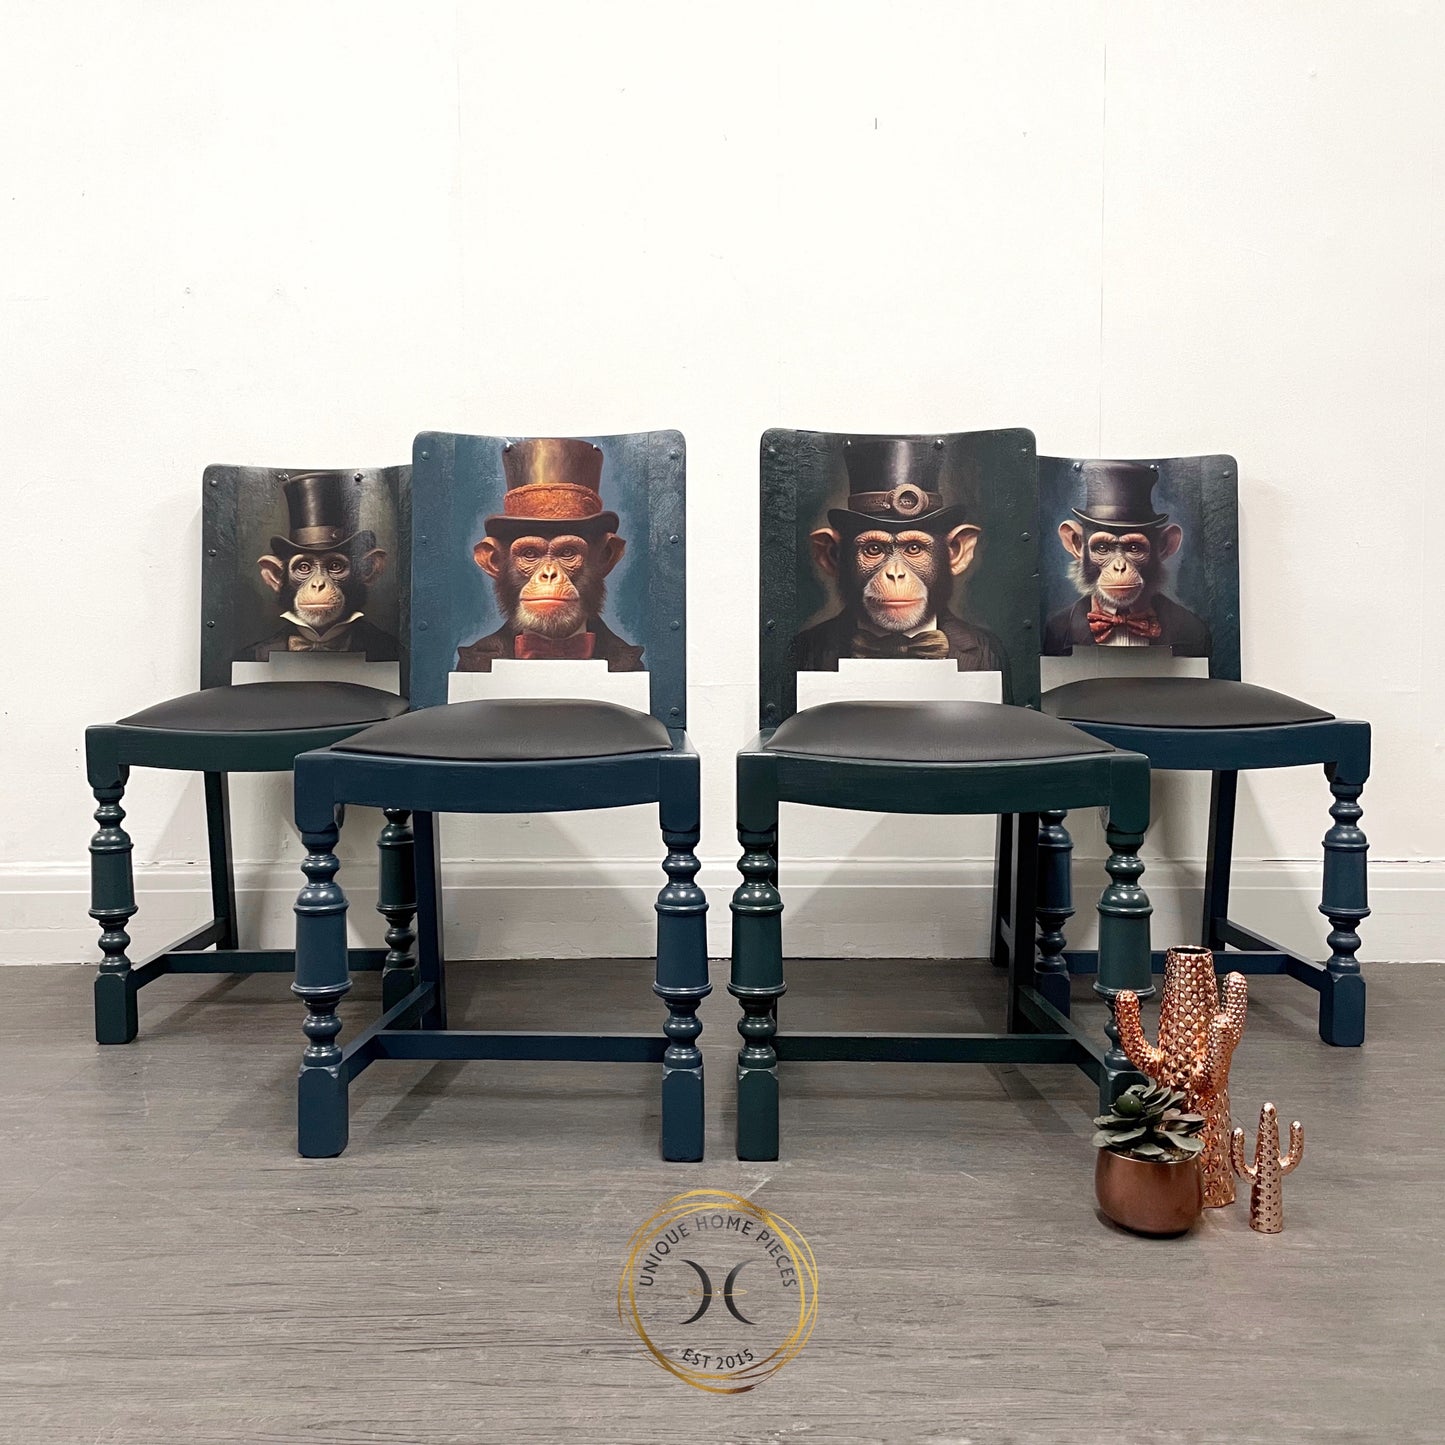 Oak Drop Leaf Dining Table and 4 Monkey Design Chairs